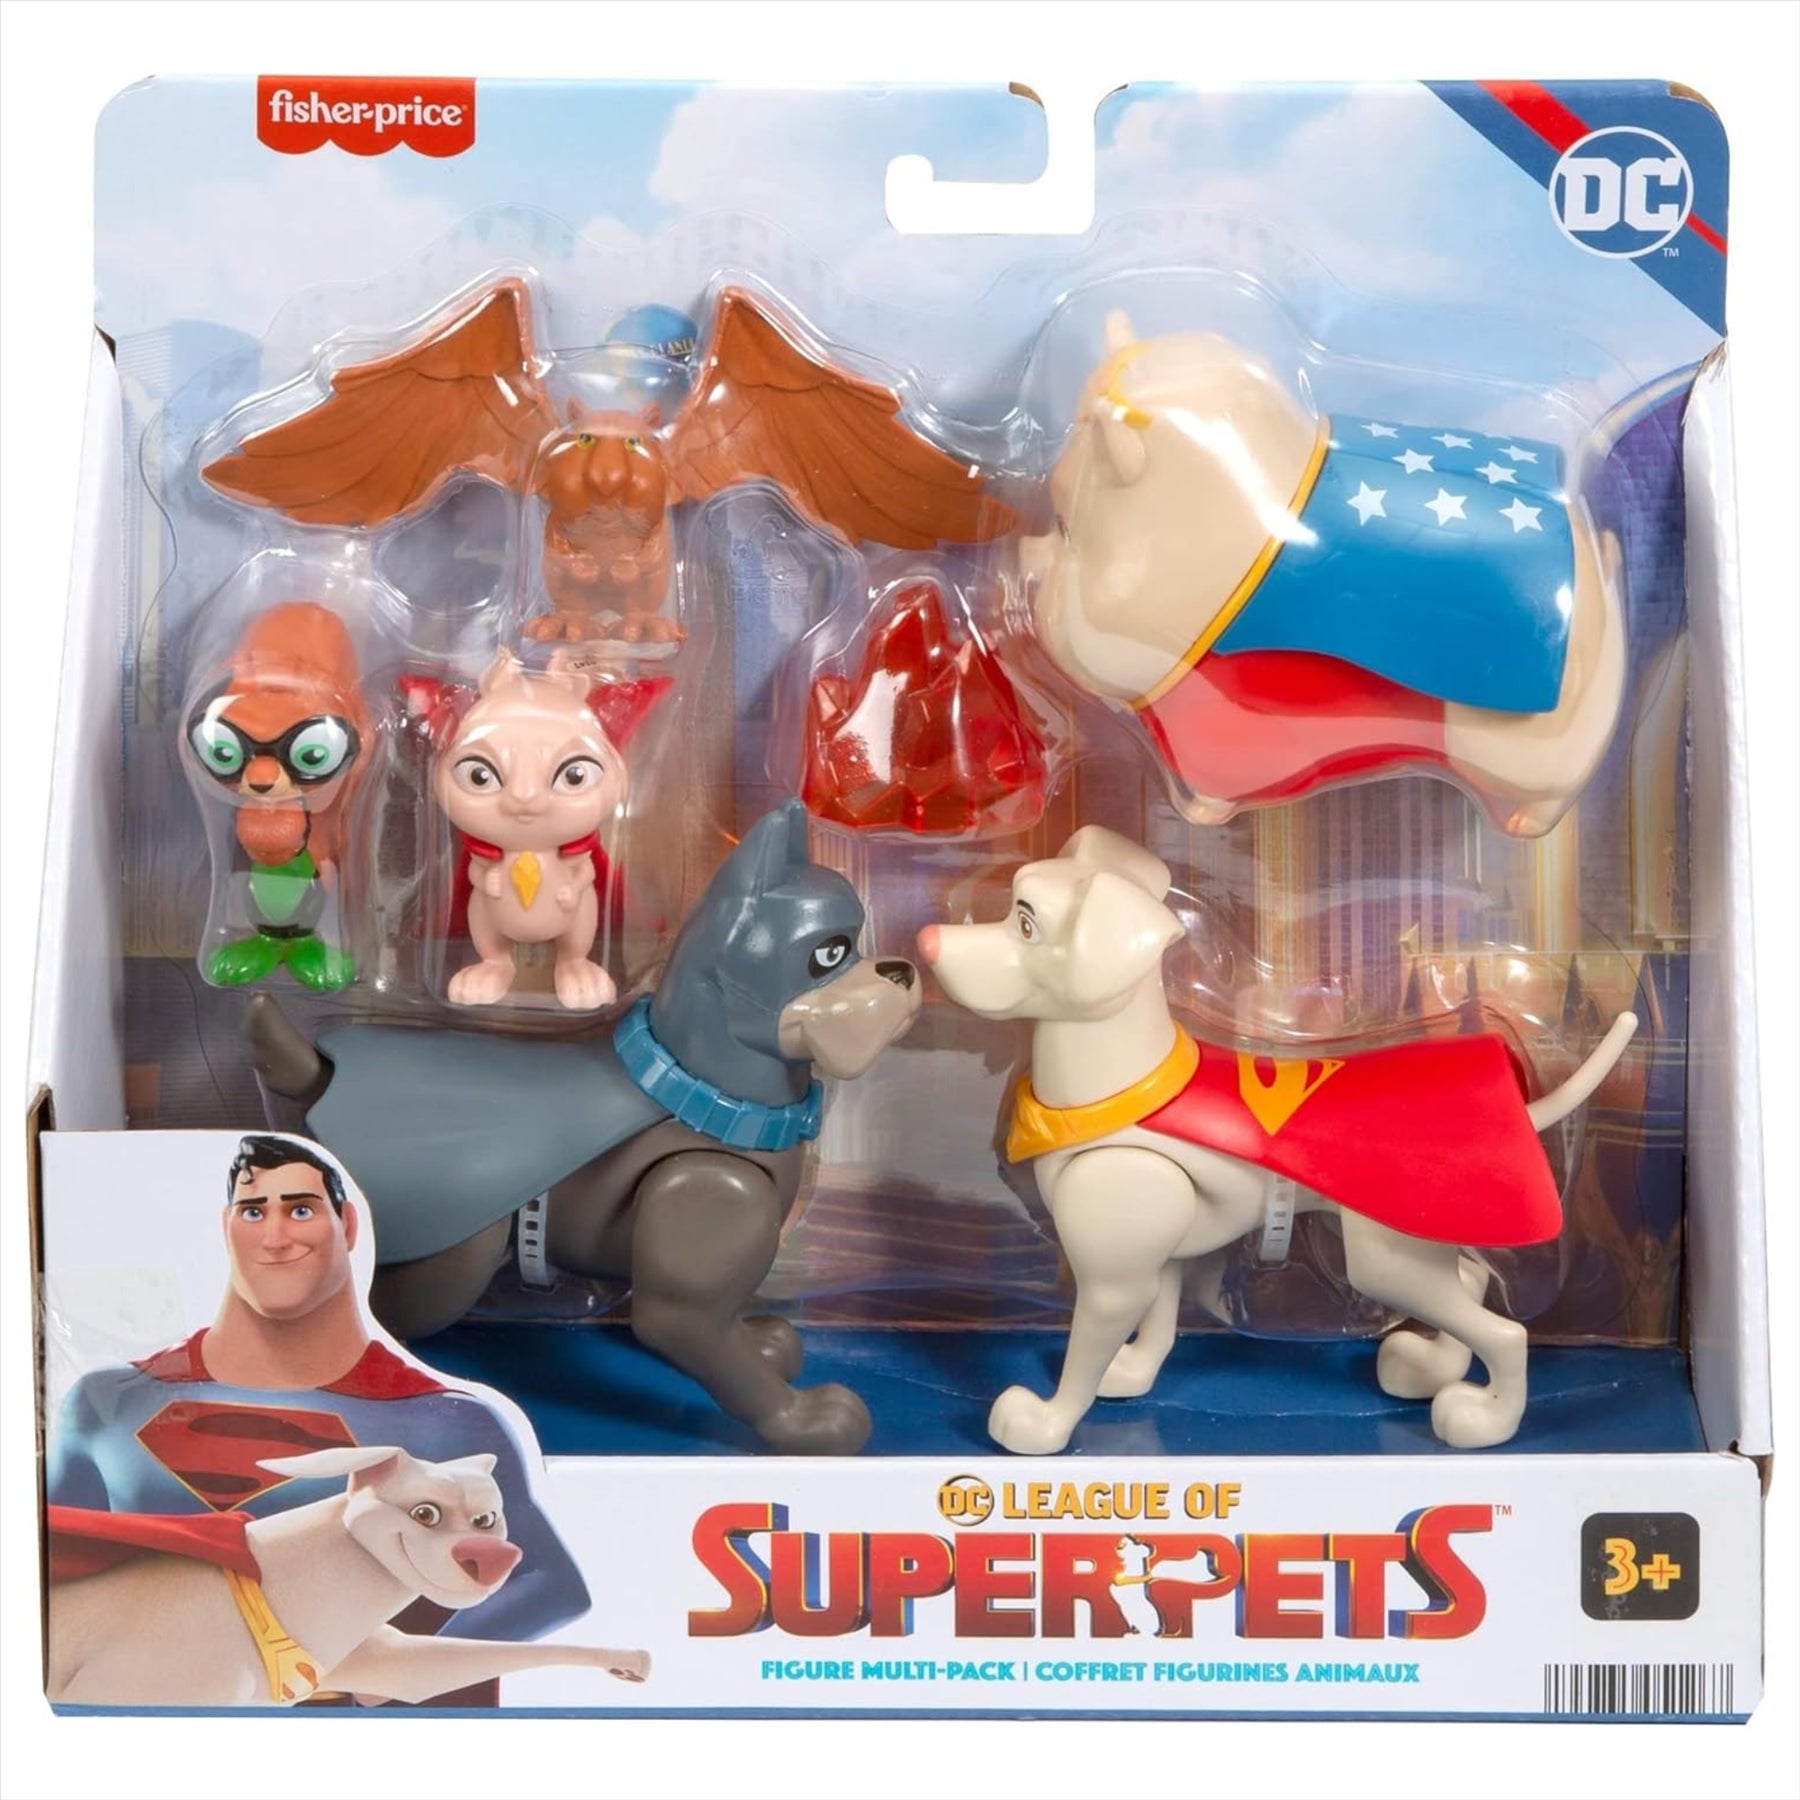 Fisher-Price Superpets Miniature Toy Action Figure Multi-Pack - Set of 6 - Toptoys2u